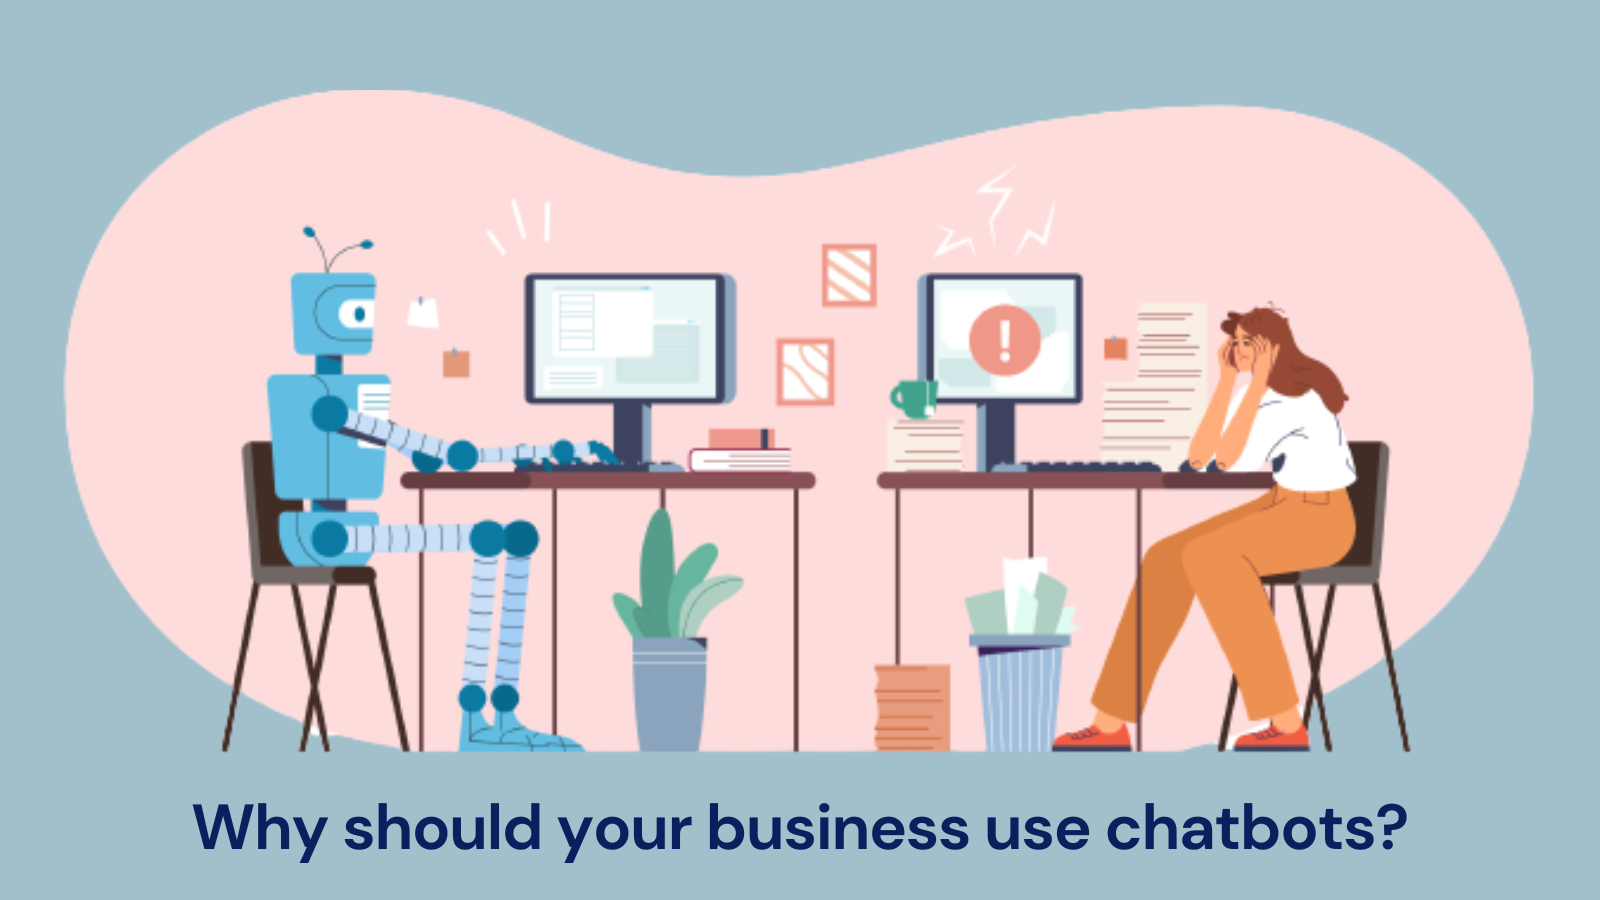 Why should your business use chatbots?